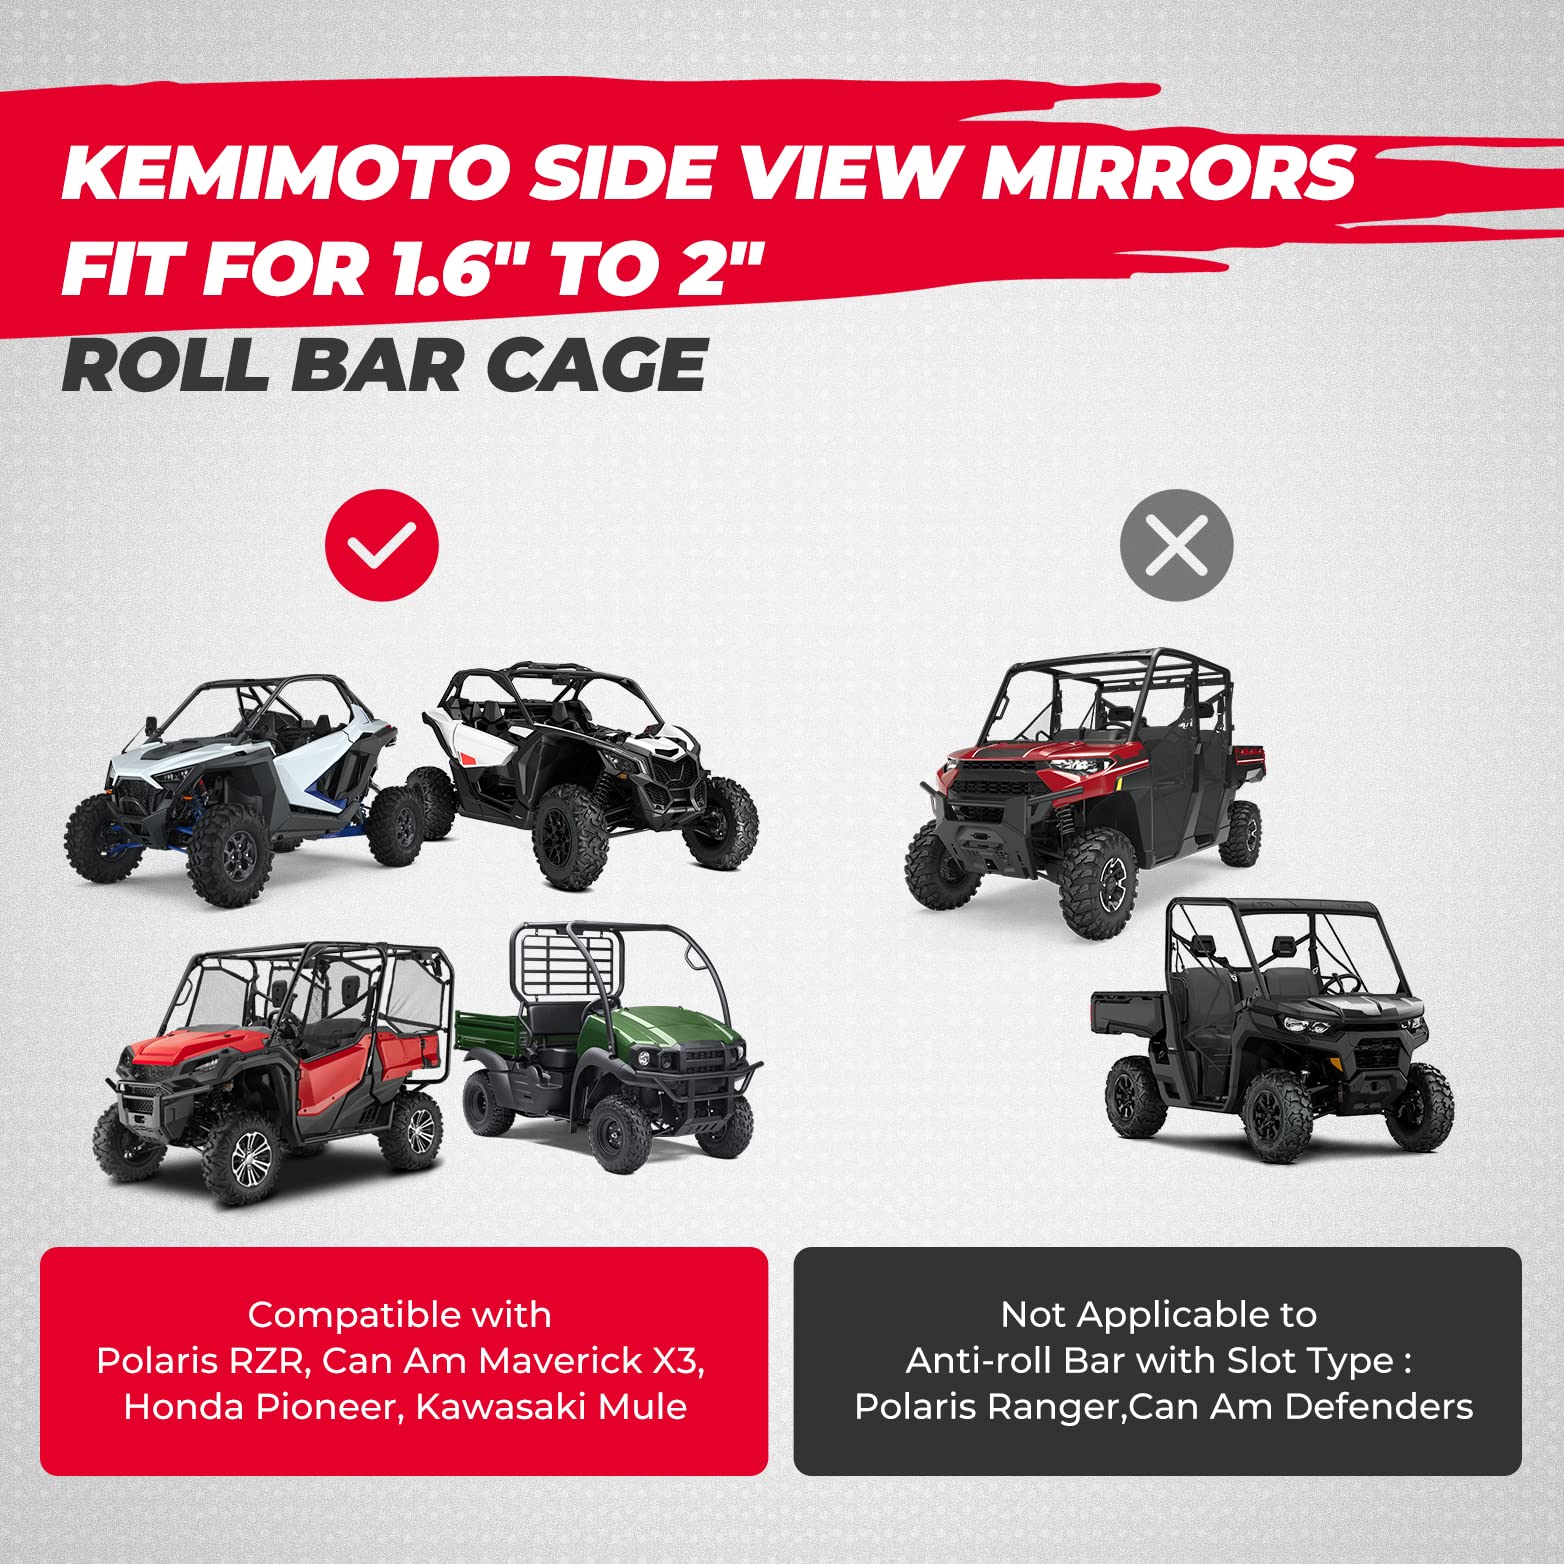 Side View Mirrors For UTV Fit 1.6